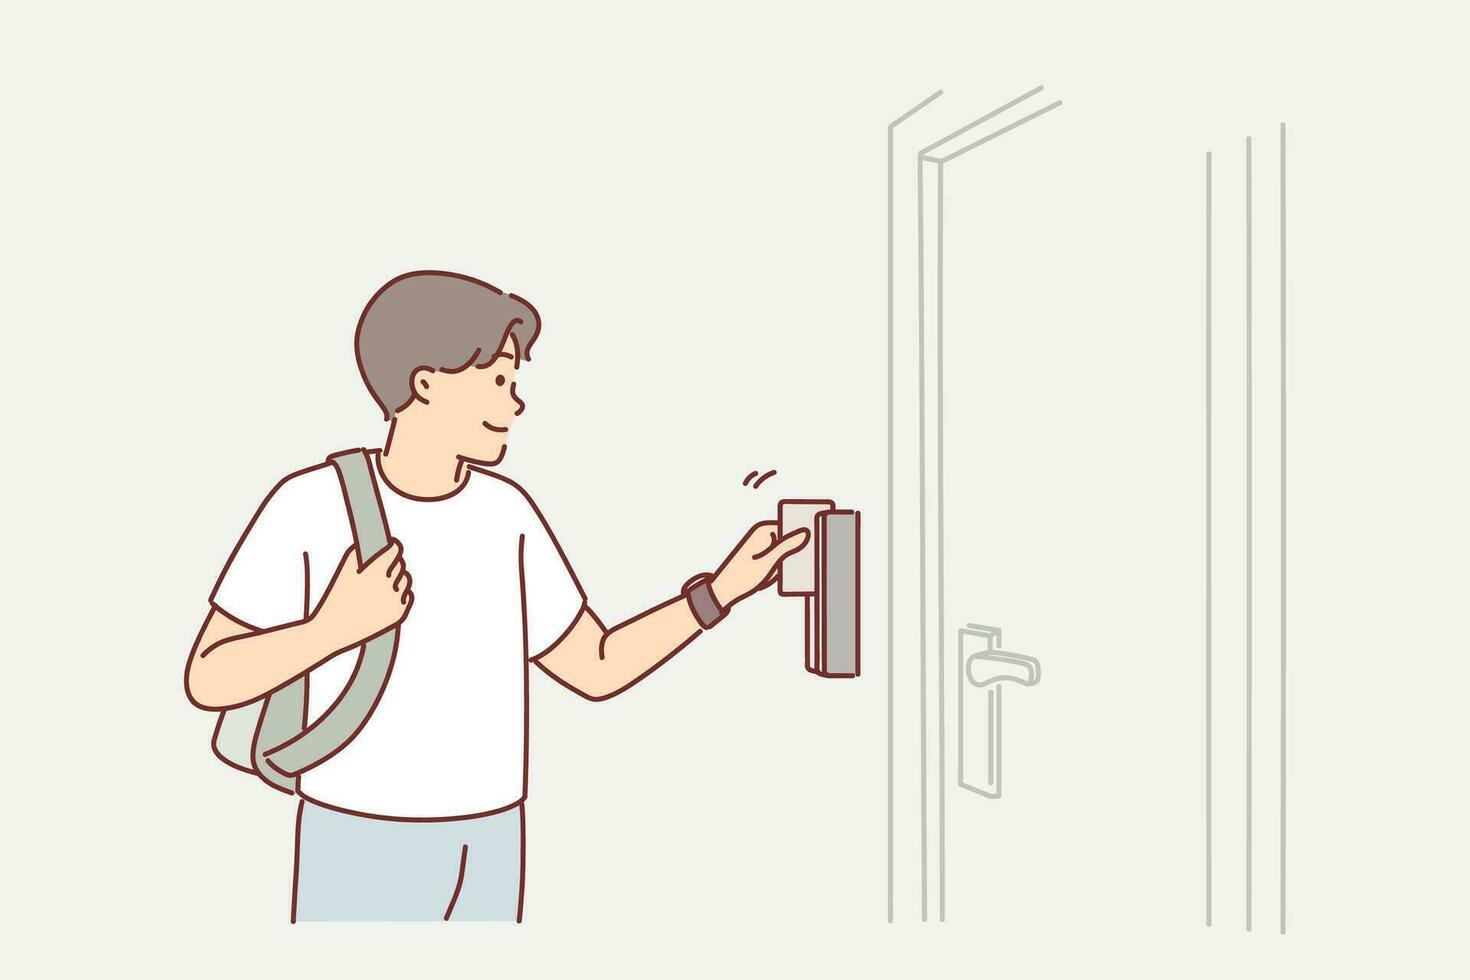 Man uses key card to open door to hotel room or hostel during tourist trip or business trip. Guy with key card opens electronic lock, gaining access to back office for company employees. vector